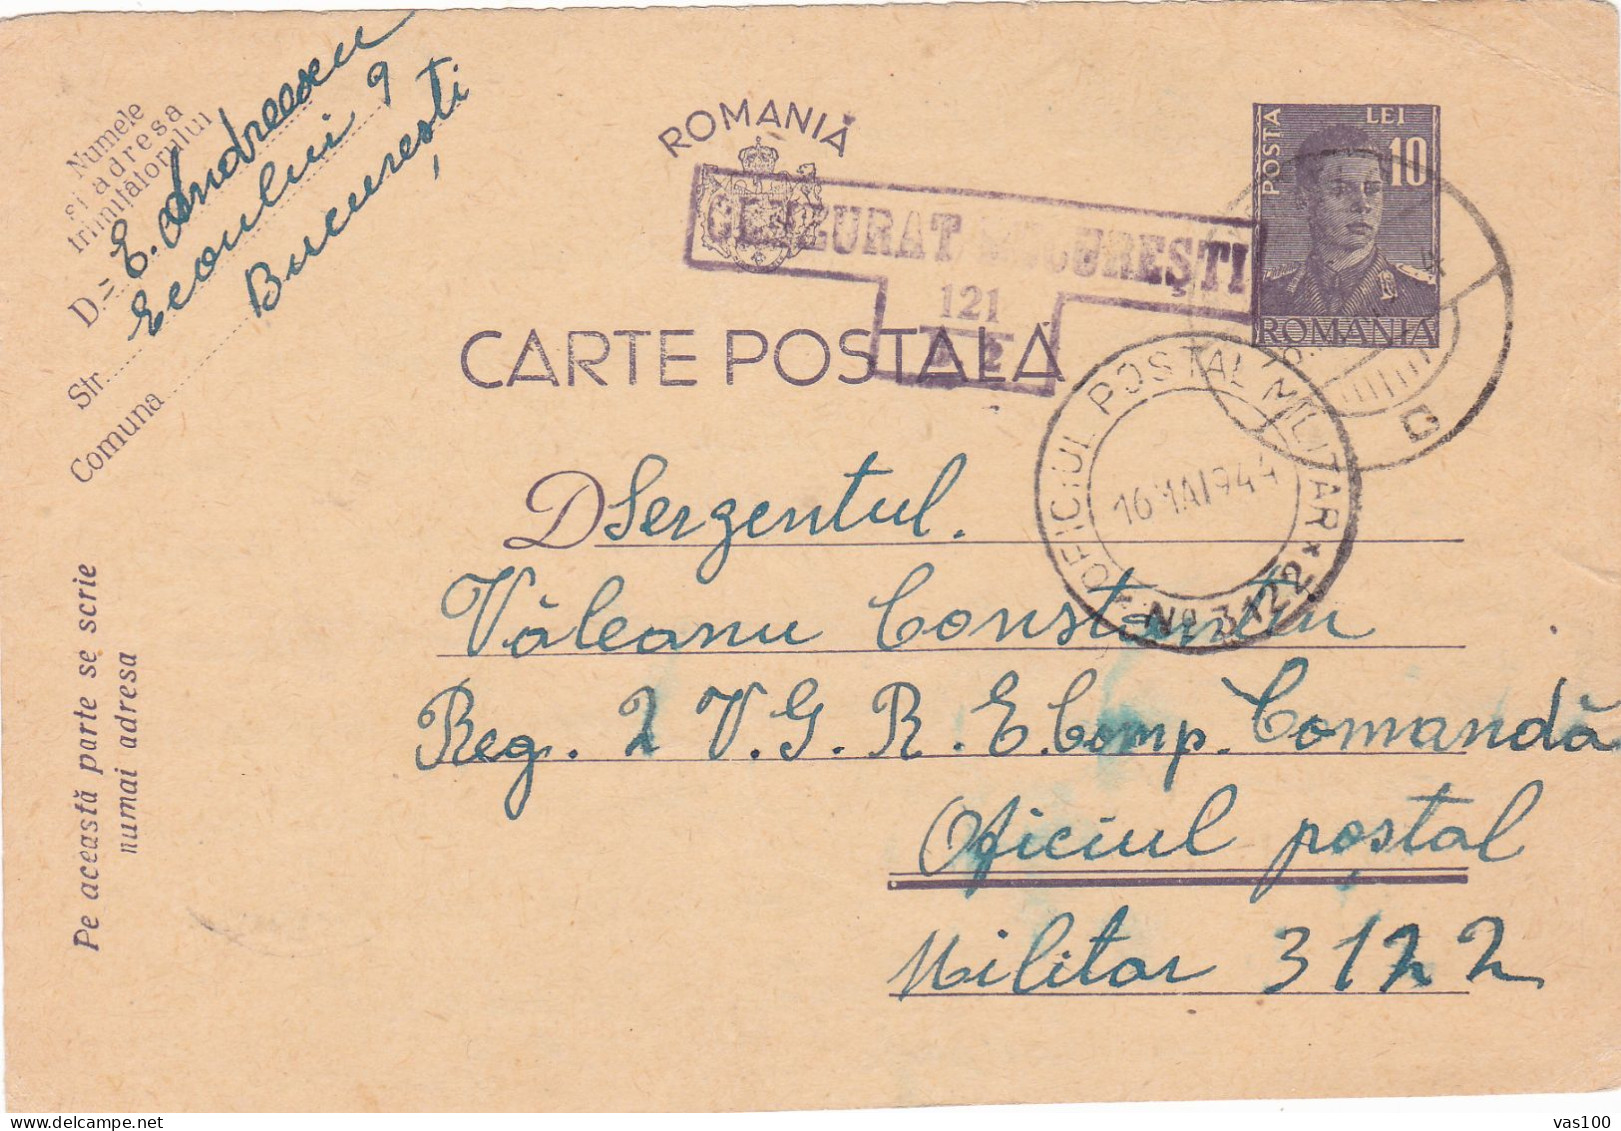 Romania, 1944, WWII  Censored, CENSOR OPM #3122 , POSTCARD STATIONERY - World War 2 Letters